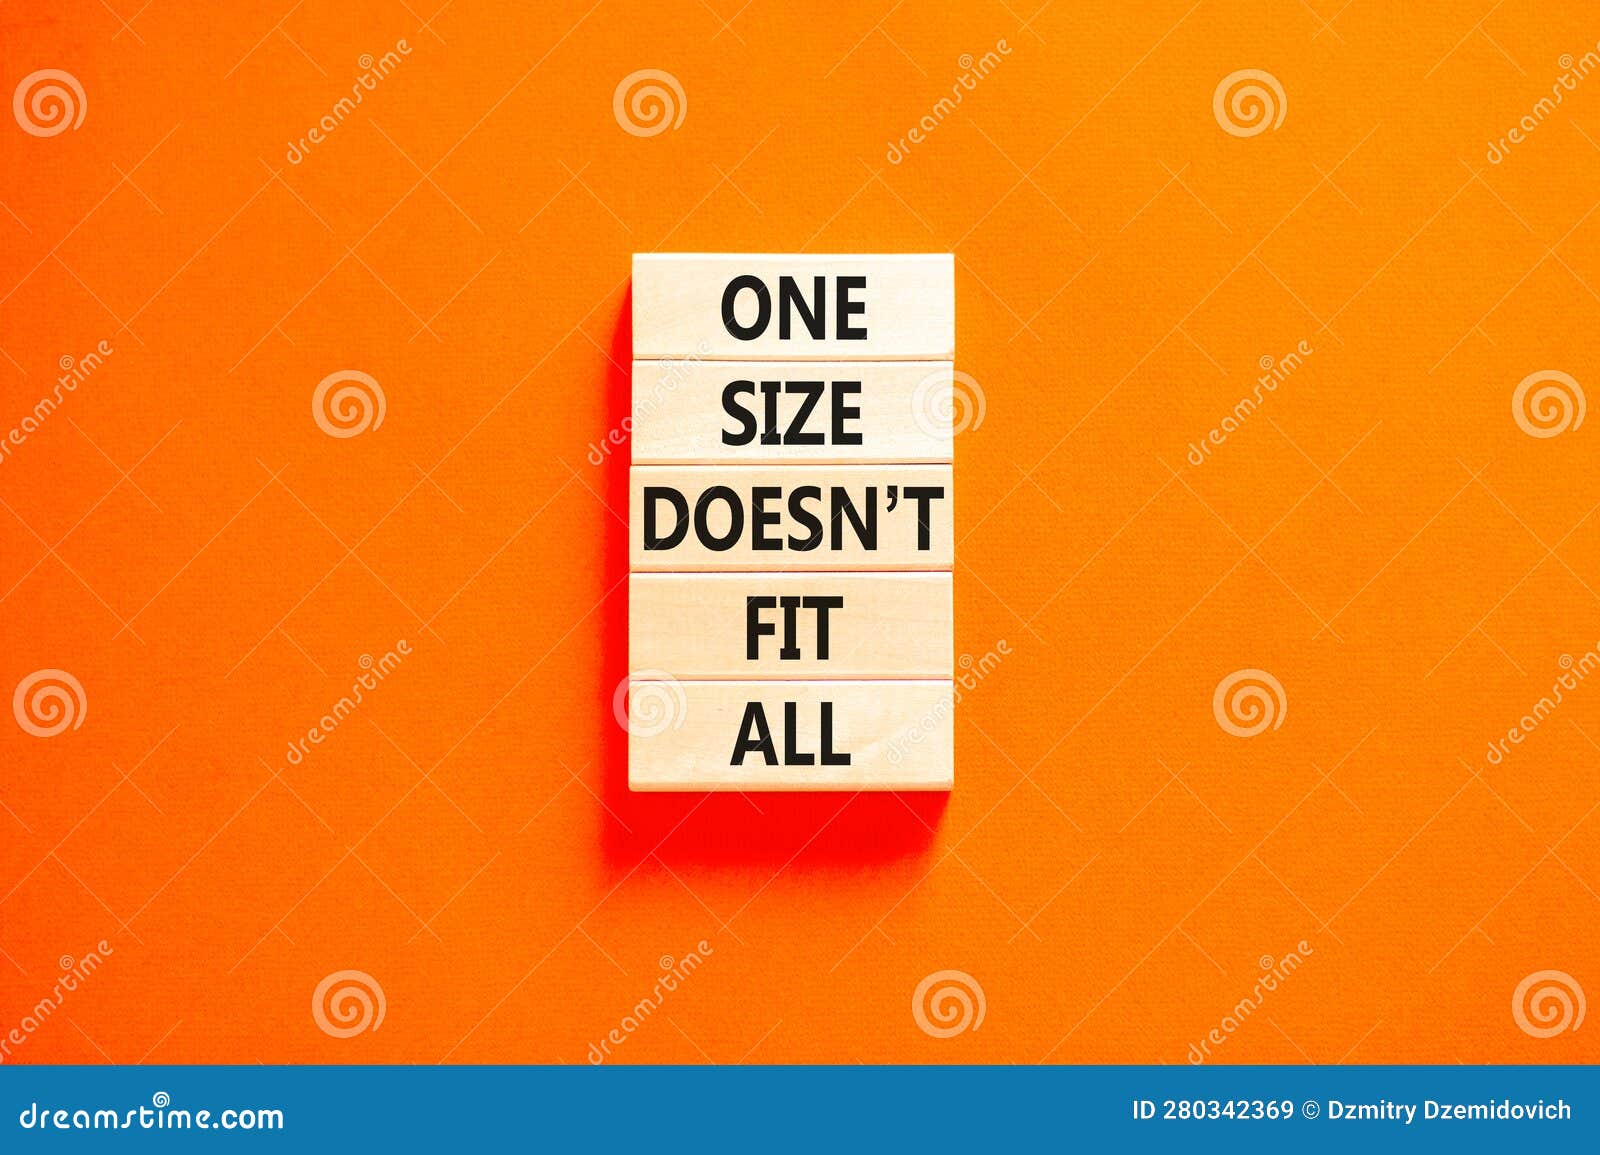 One Size Does Not Fit All Symbol. Concept Words One Size Does Not Fit All  on Wooden Blocks Stock Image - Image of shop, business: 280342369